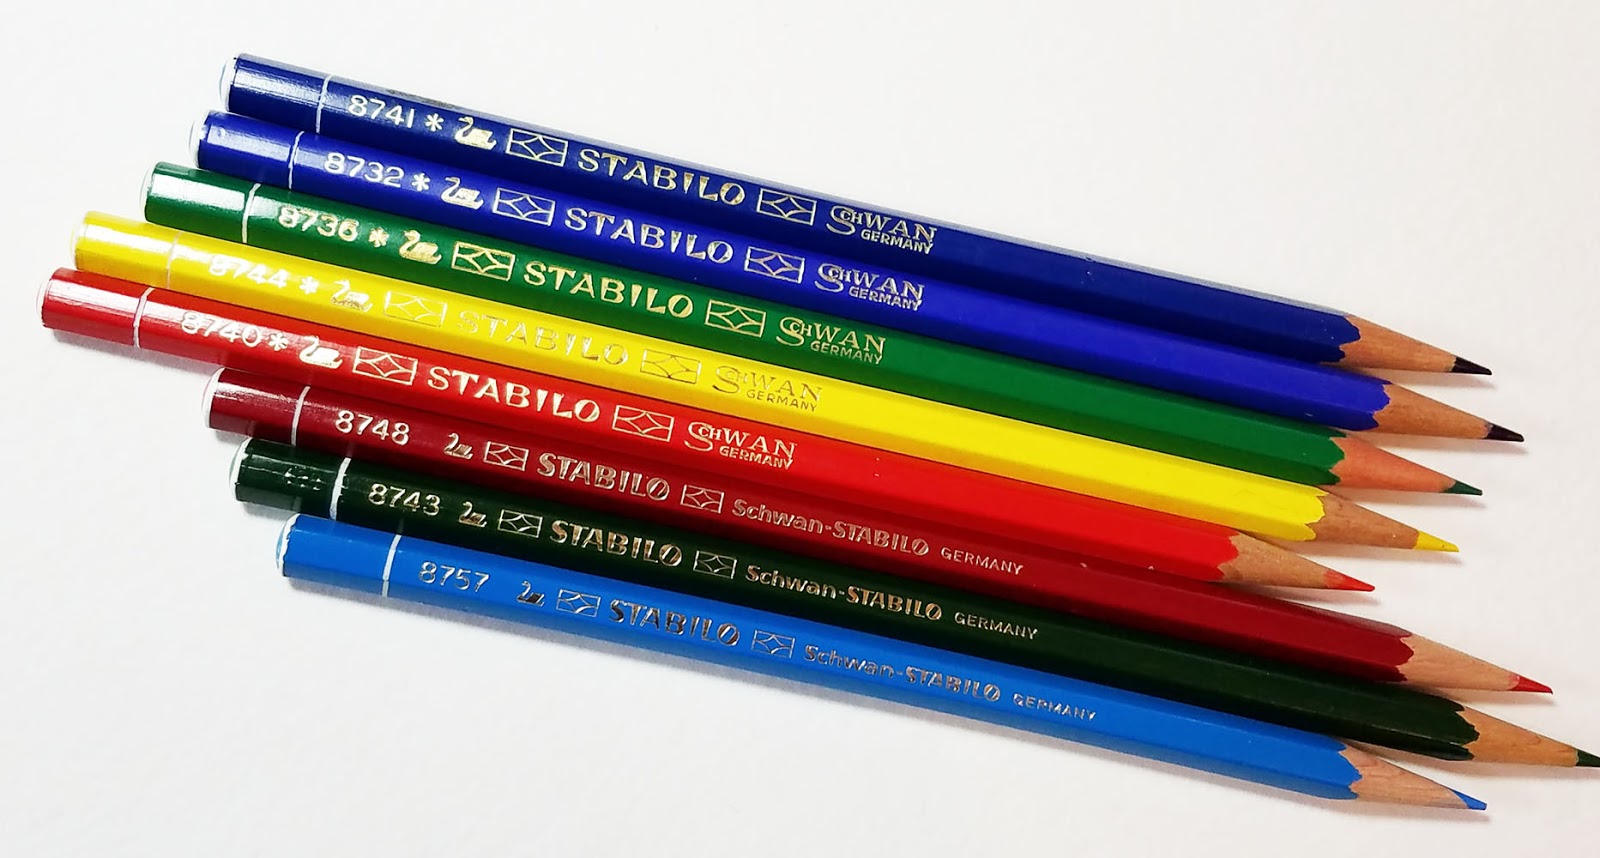 Schwan Stabilo 24 CarbOthello Professional Colored Charcoal Pencils Germany  Used